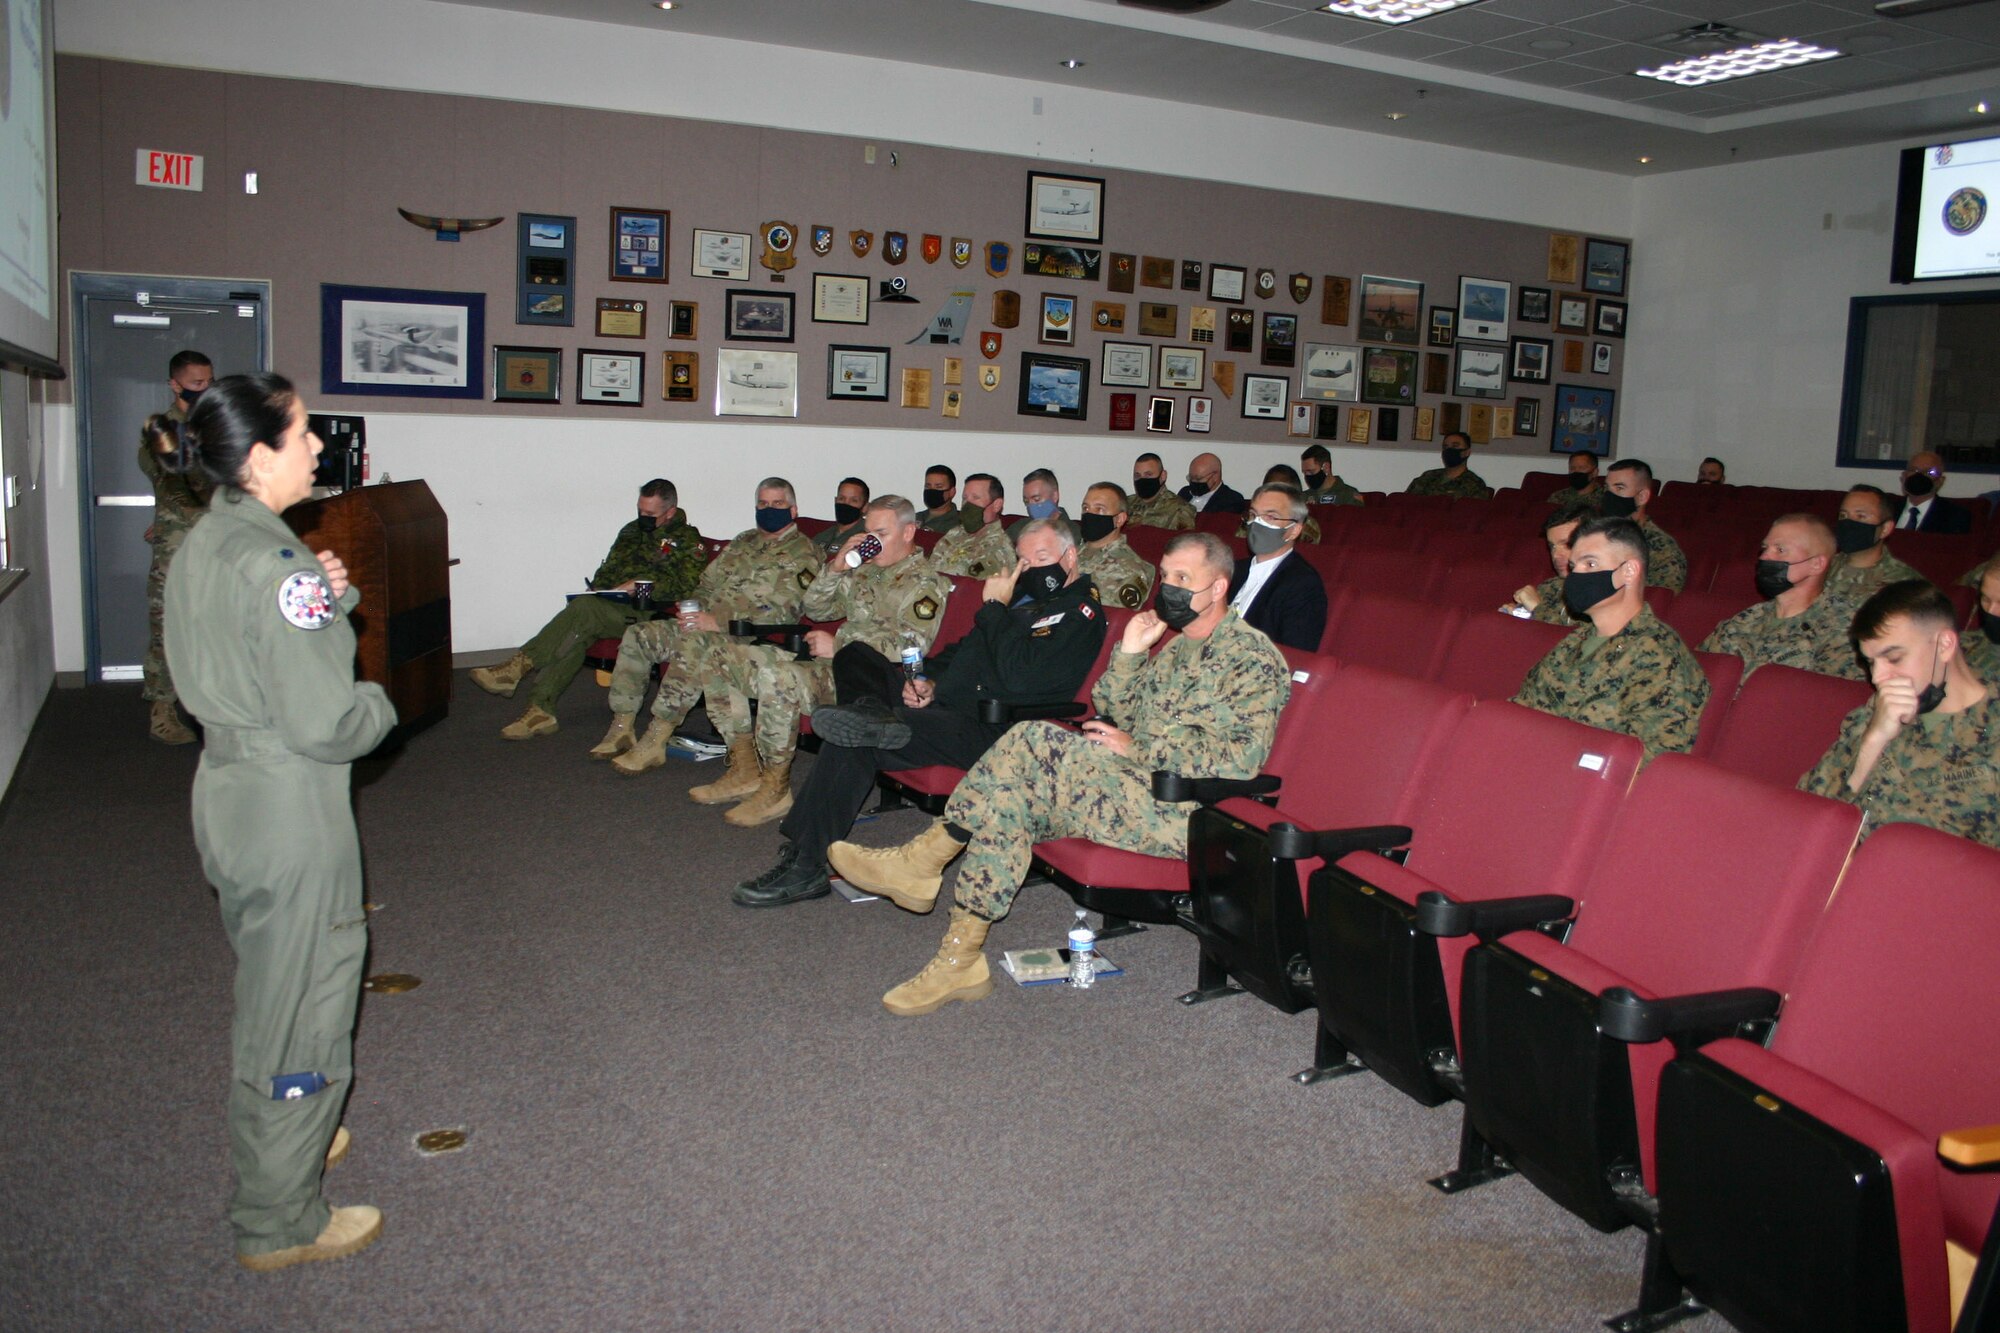 photo of U.S. Airman briefing group